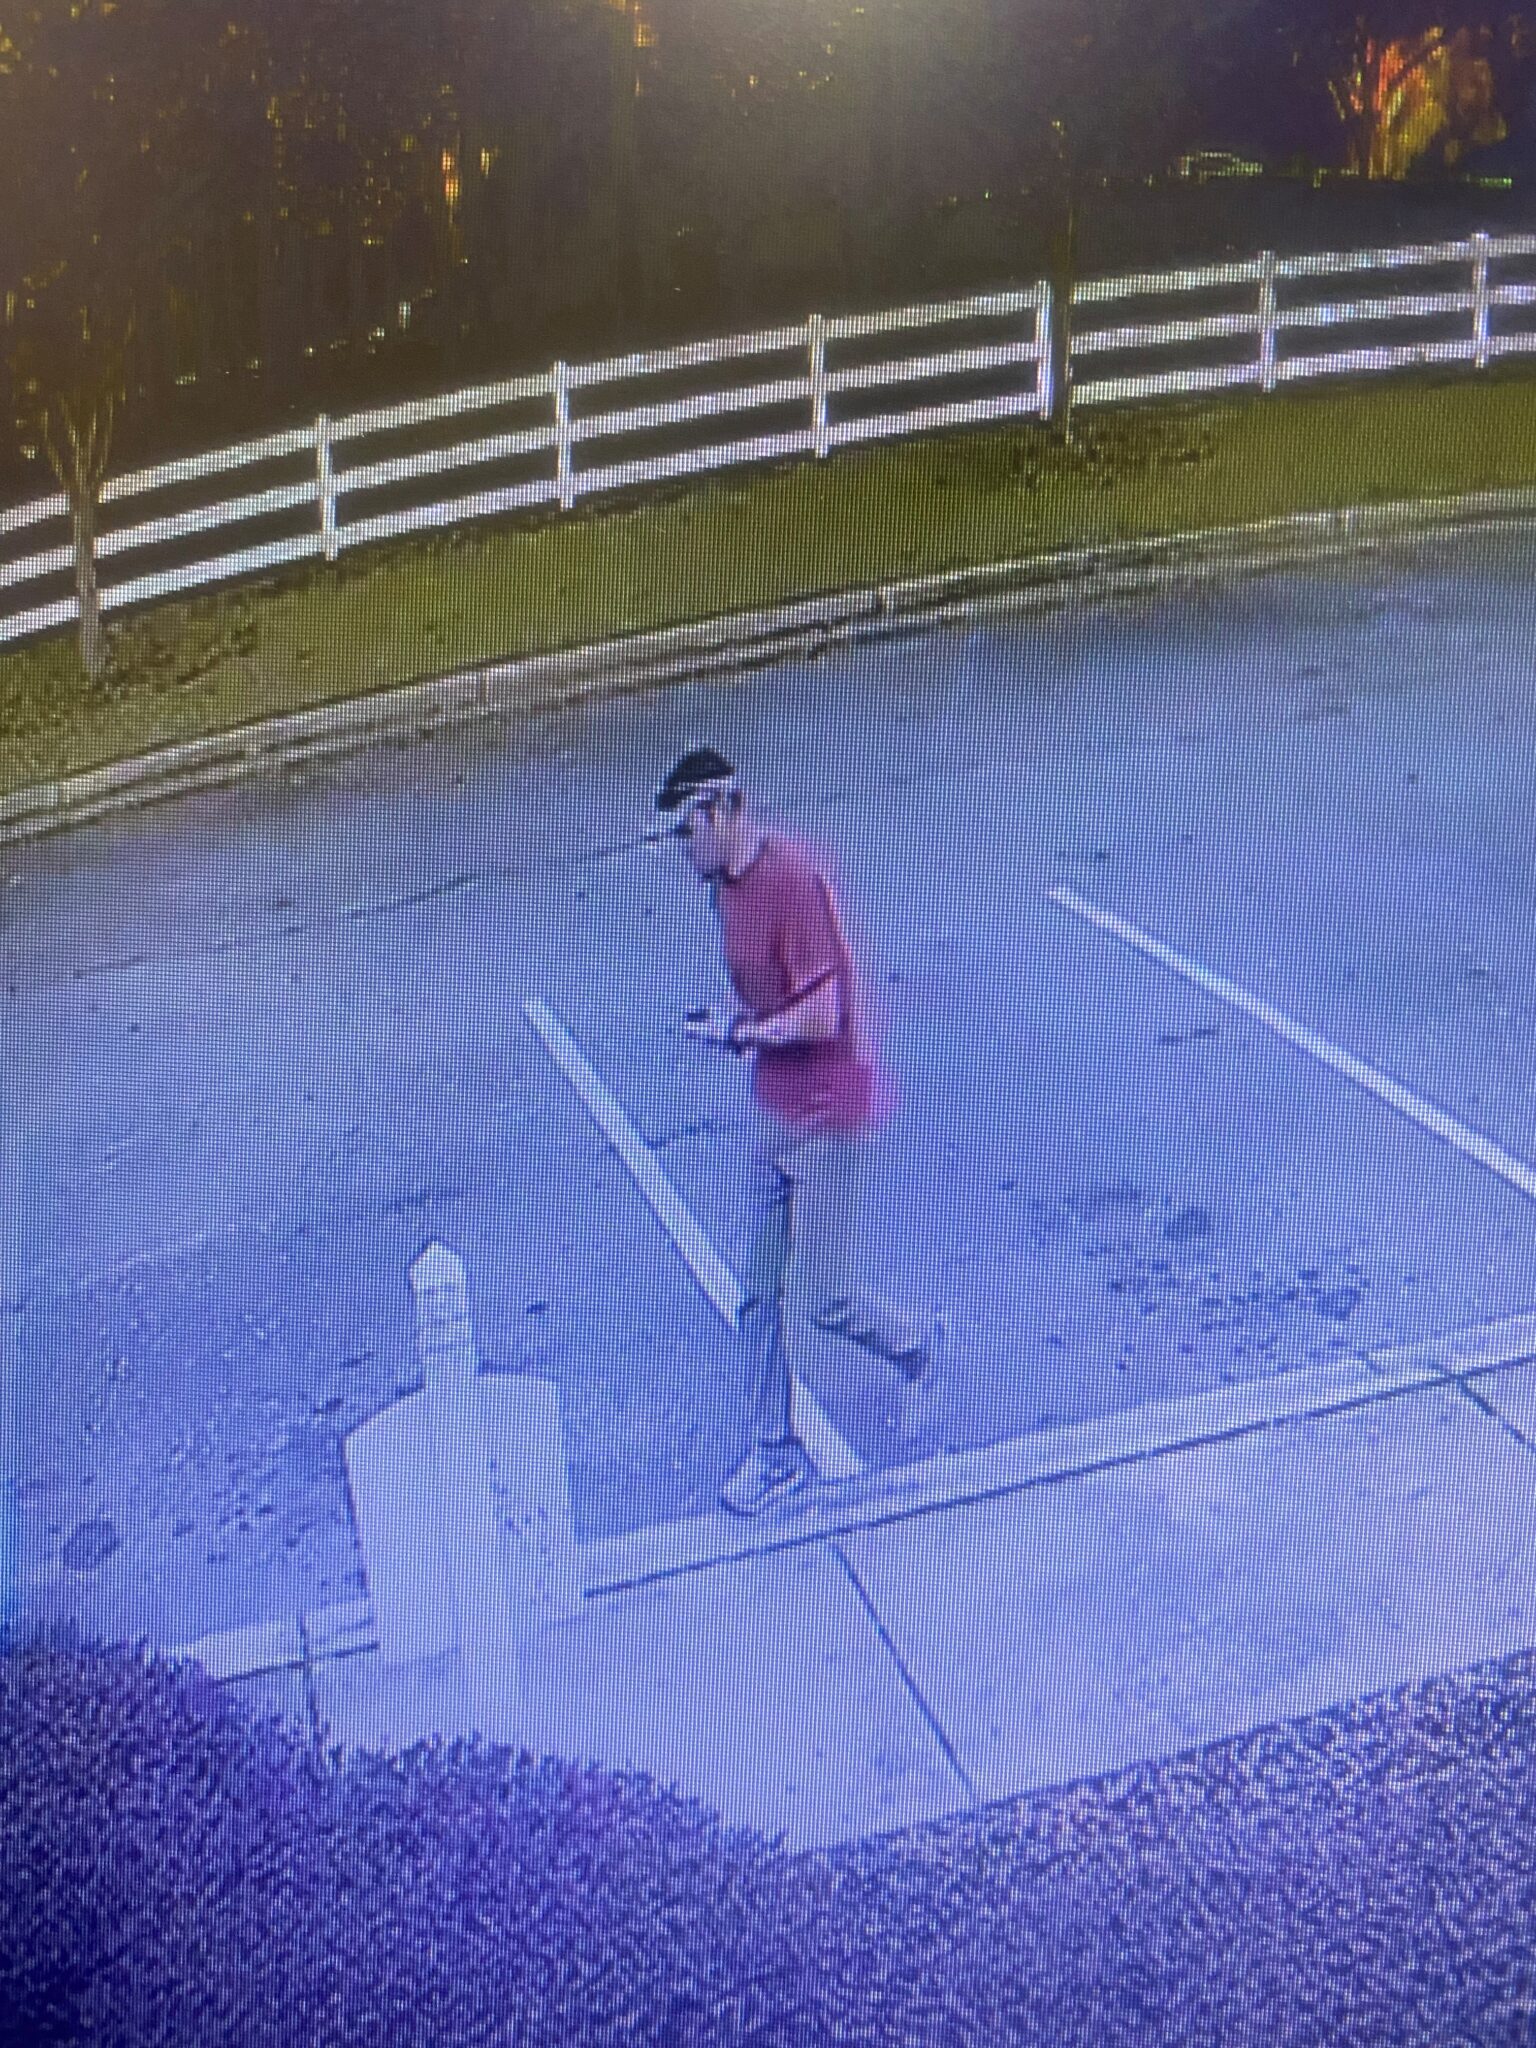 Thief caught on camera stealing trailer